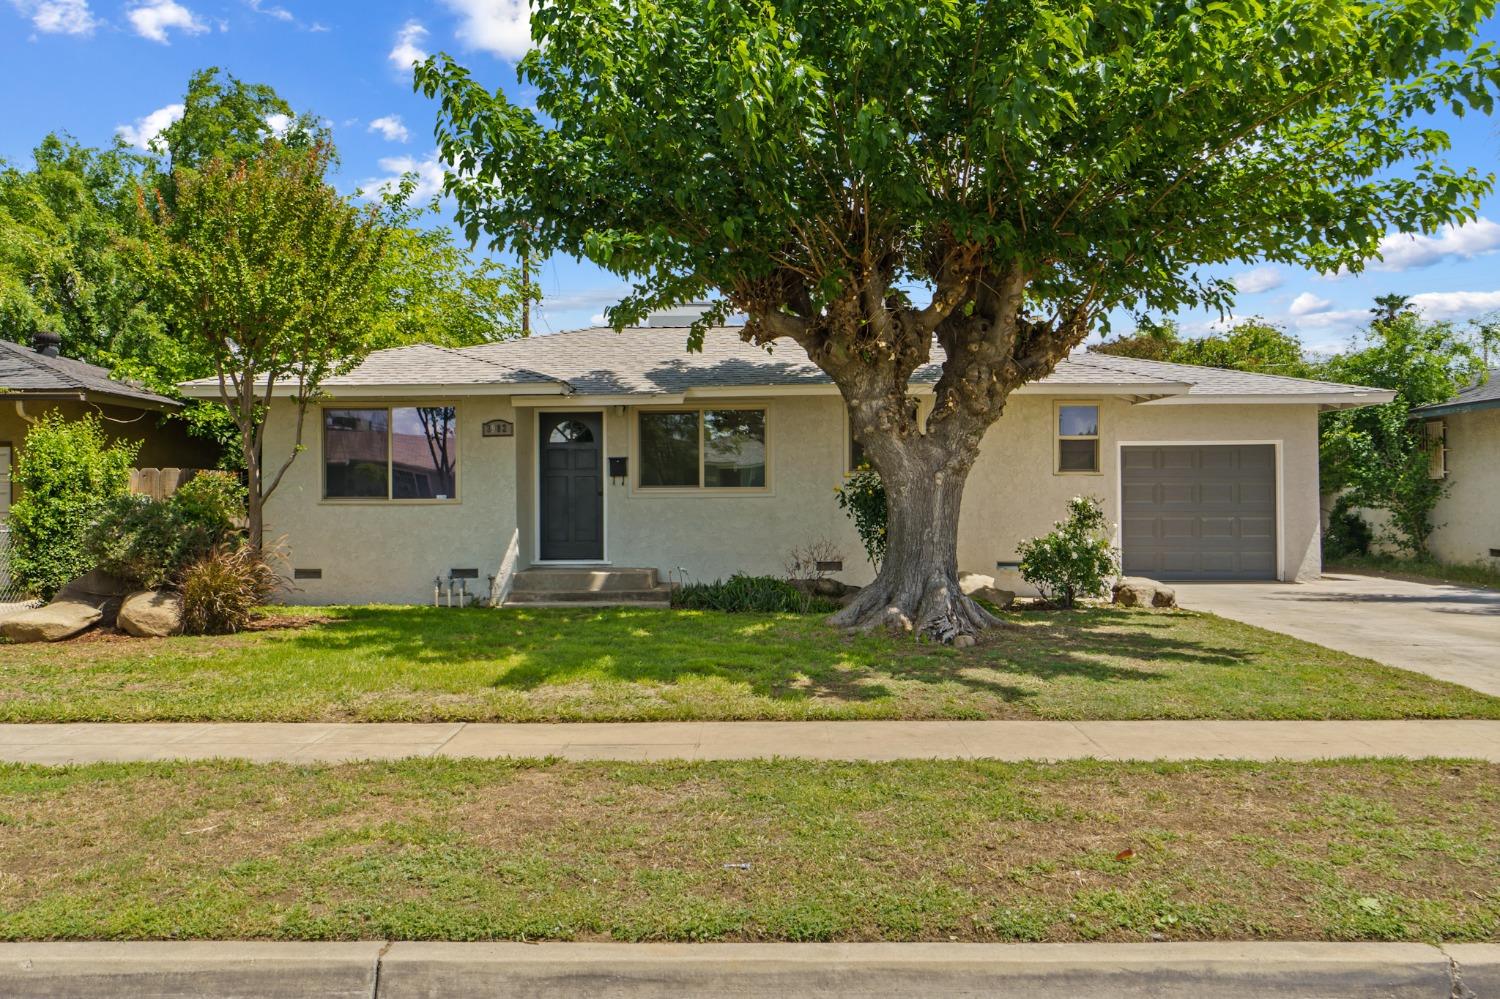 Photo of 3982 N Woodson Ave in Fresno, CA